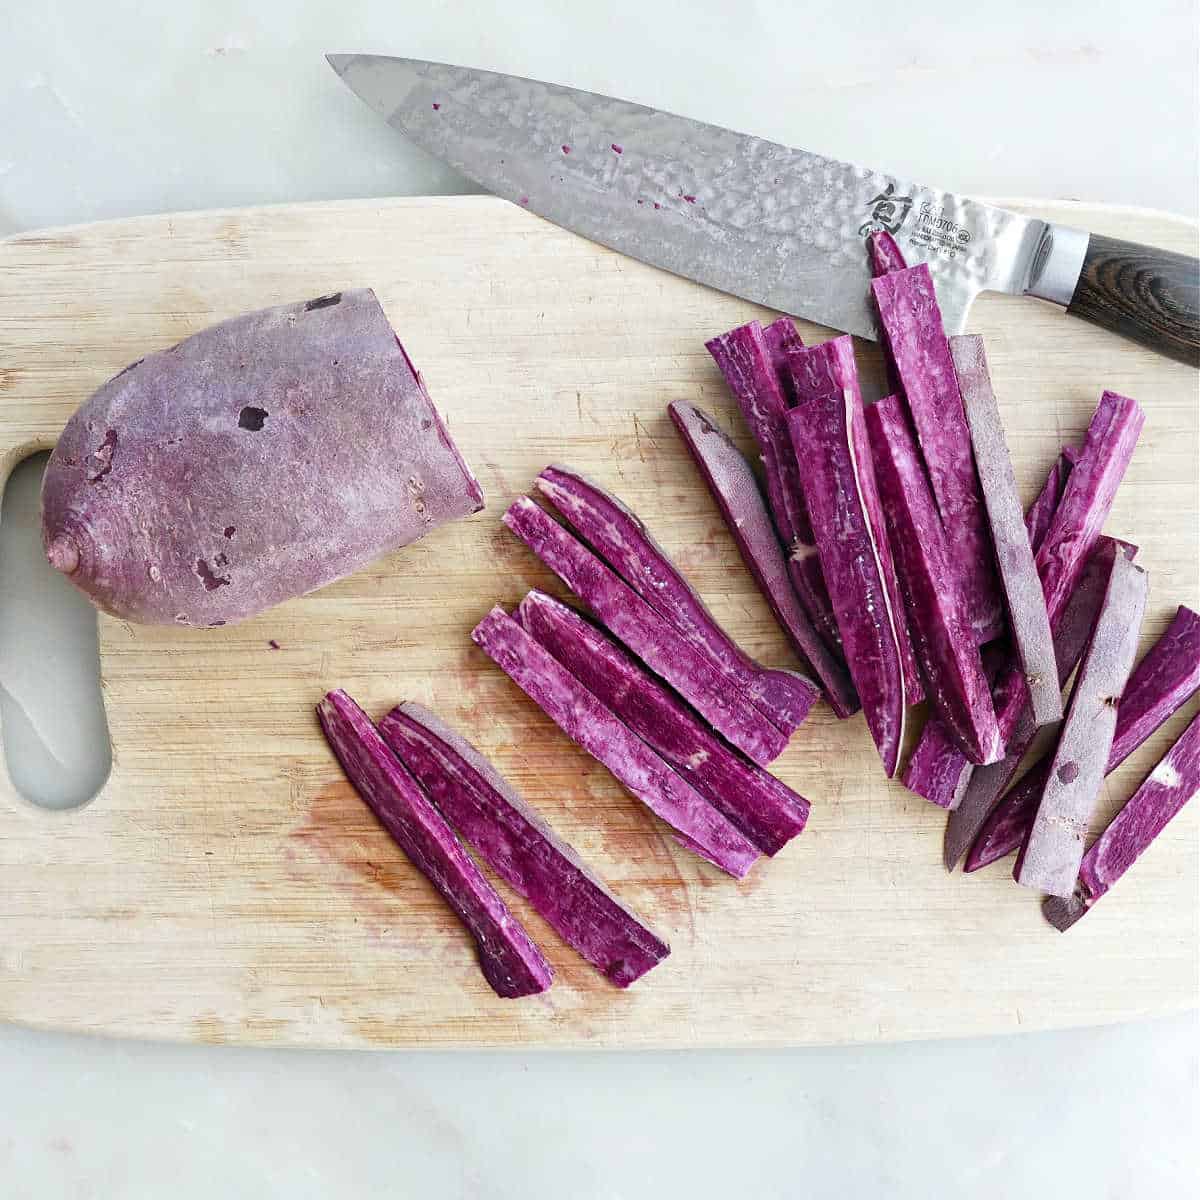 purple sweet potato being cut into fries on a cutting board with a knife